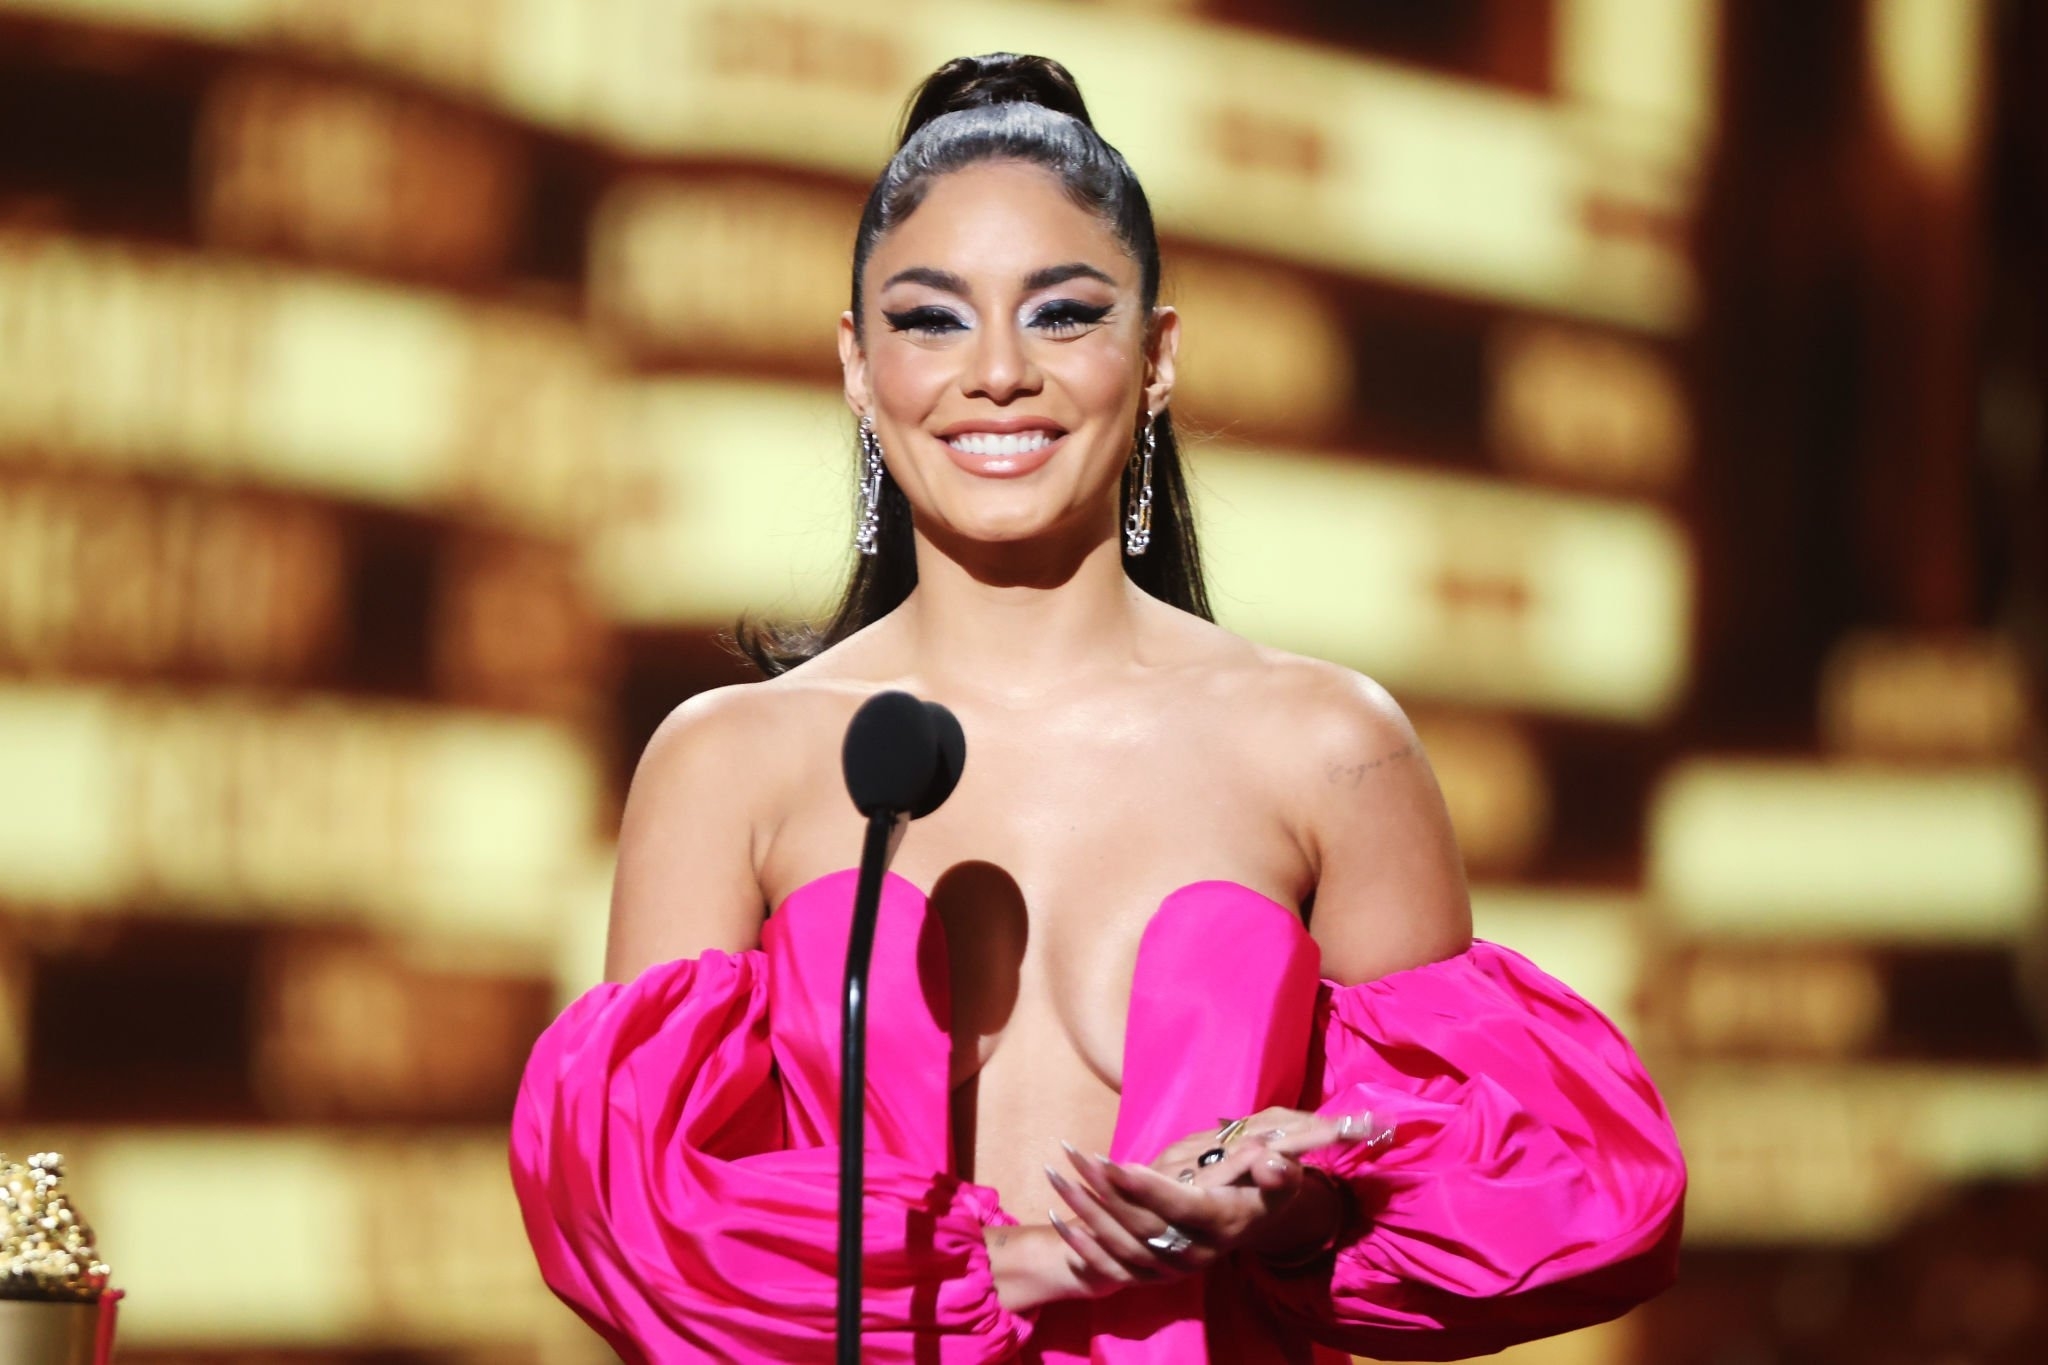 Vanessa Hudgens Still Rules – Her Cleavage is Simply Exceptional and She is the Best